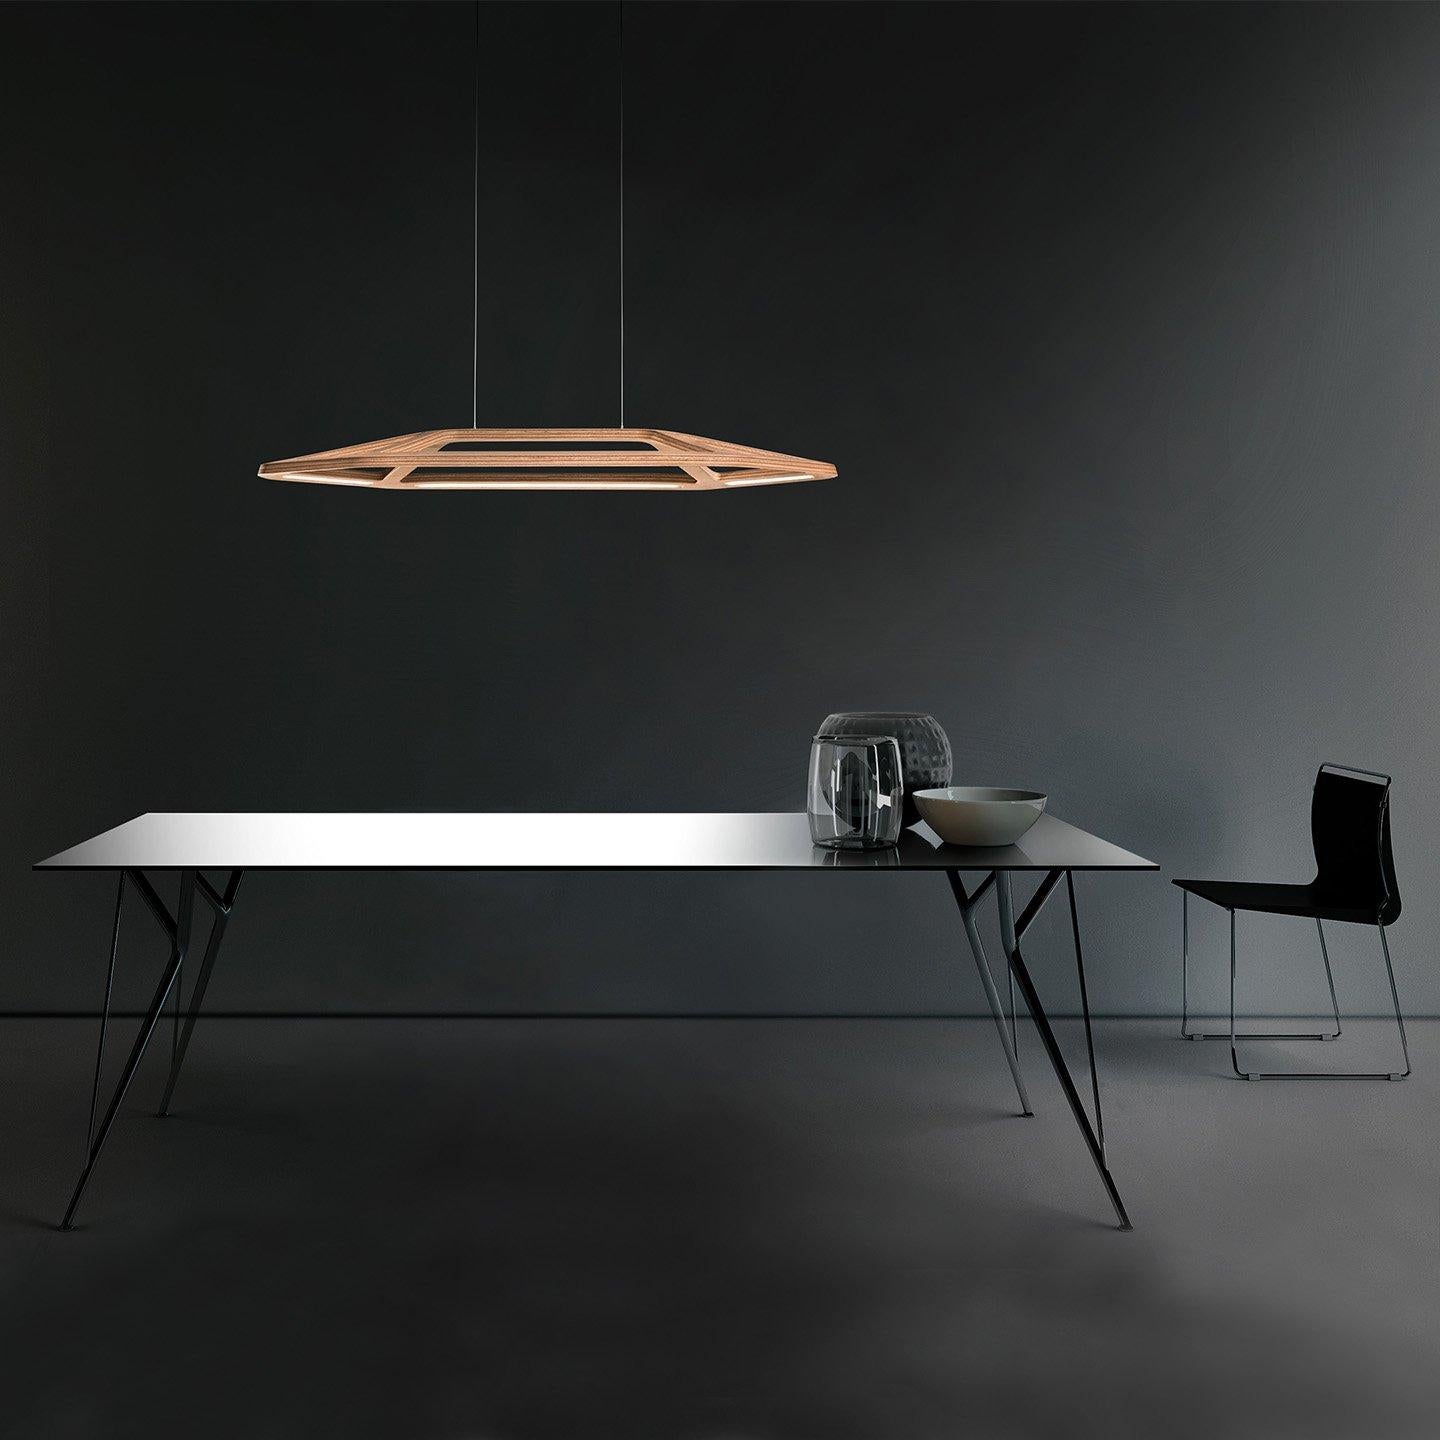 Aki, designed by Studio Dreimann in 2012, is a clever study of the use of new materials and forms. While Aki is a stunning presence, its leaflike form and solid okume wood frame is designed to be light beyond belief. Aki is constructed of solid